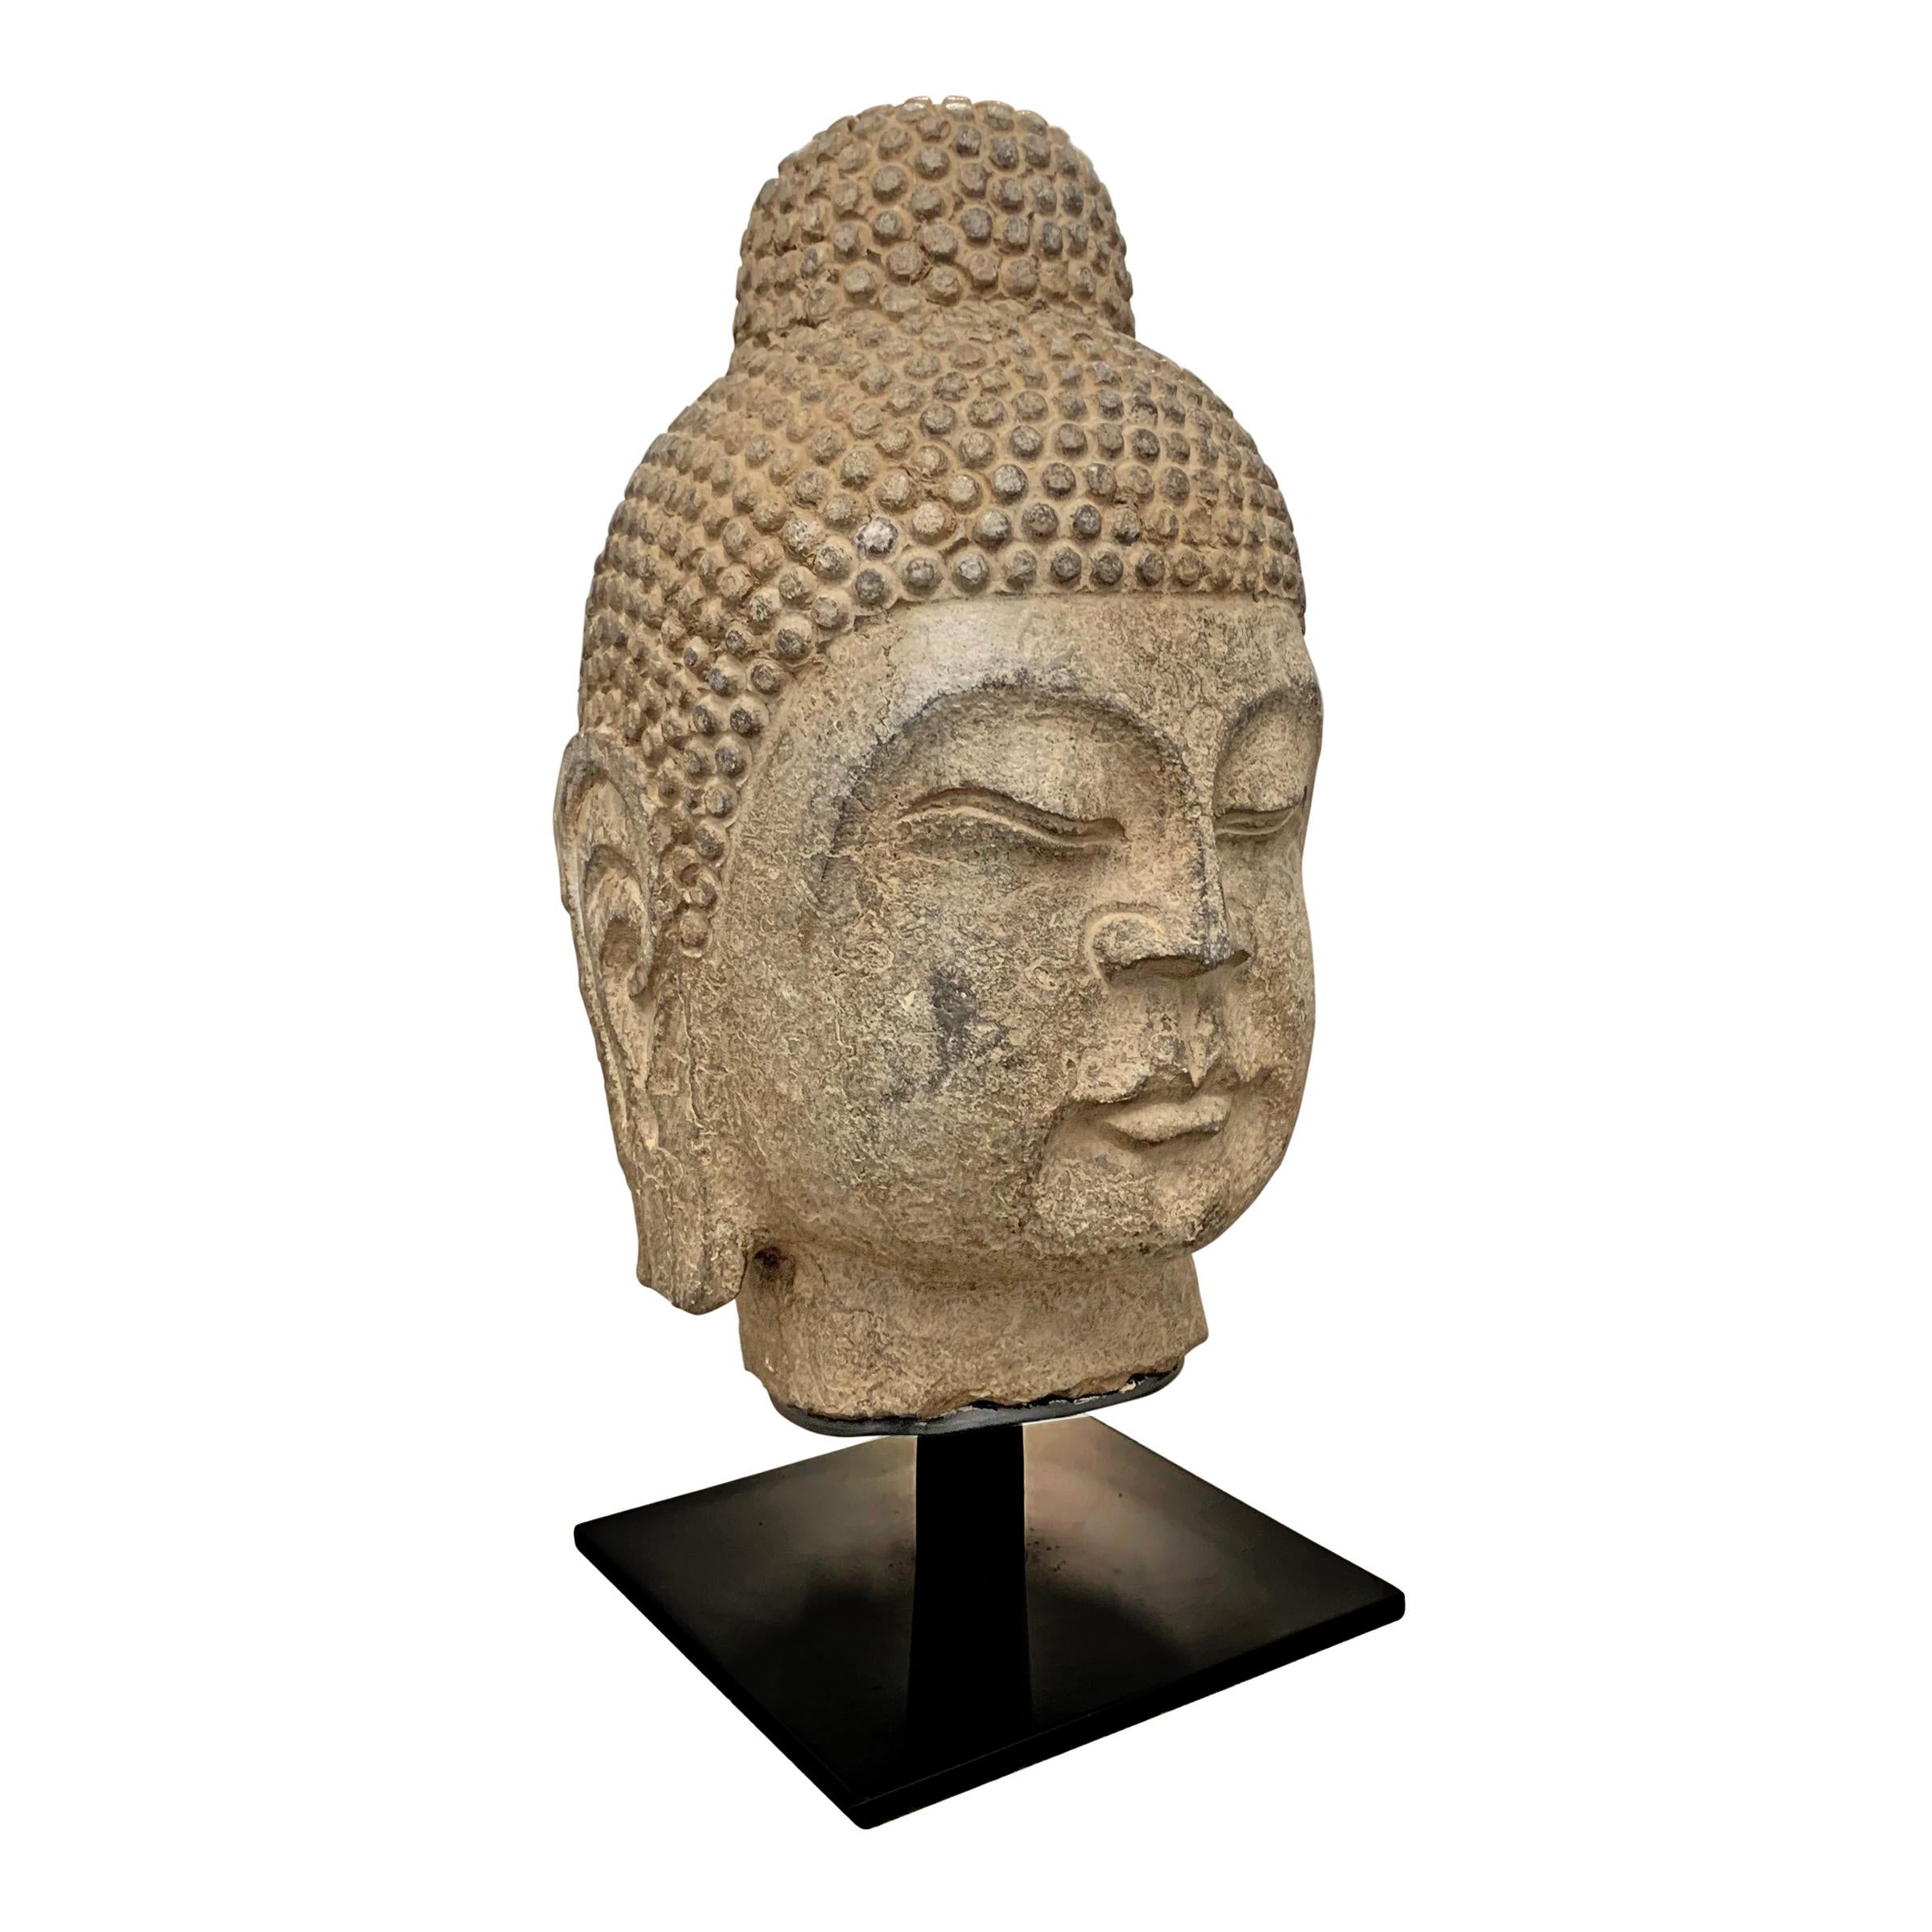 A beautiful carved limestone Buddha head with a serene contemplative expression, on a custom steel mount.